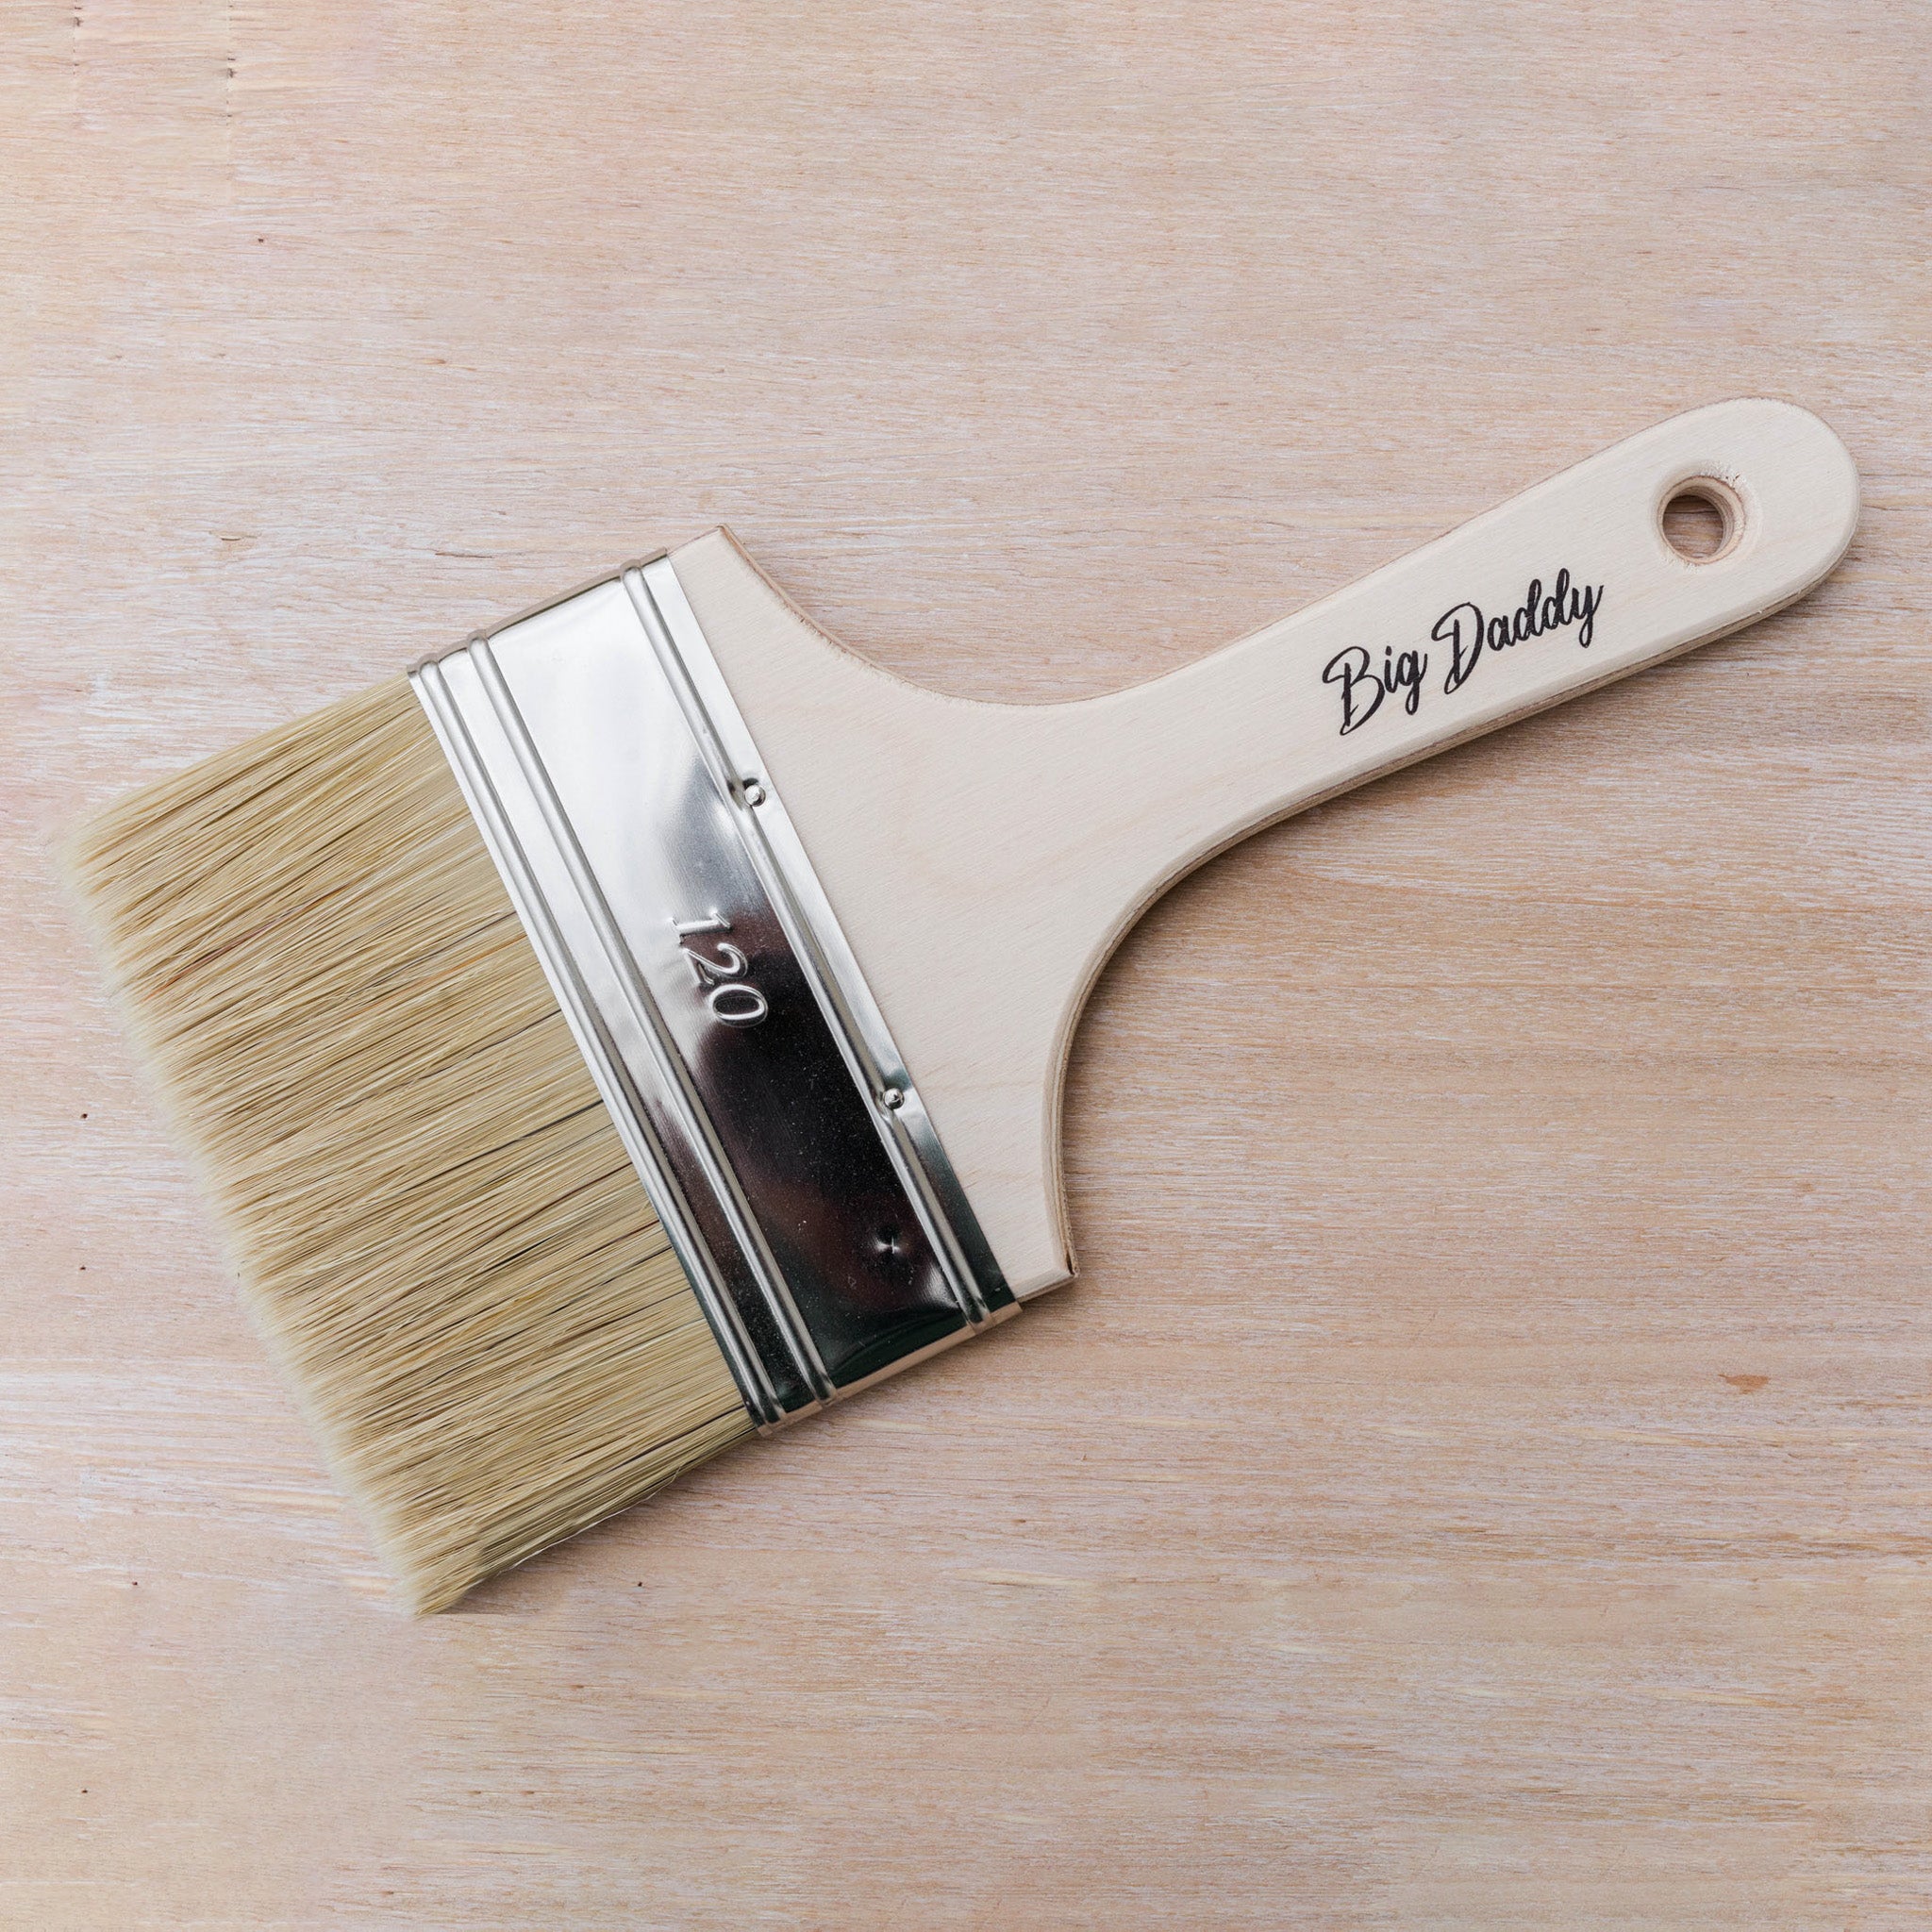 Dixie Belle Paint's Bid Daddy Brush is against a light wood background.